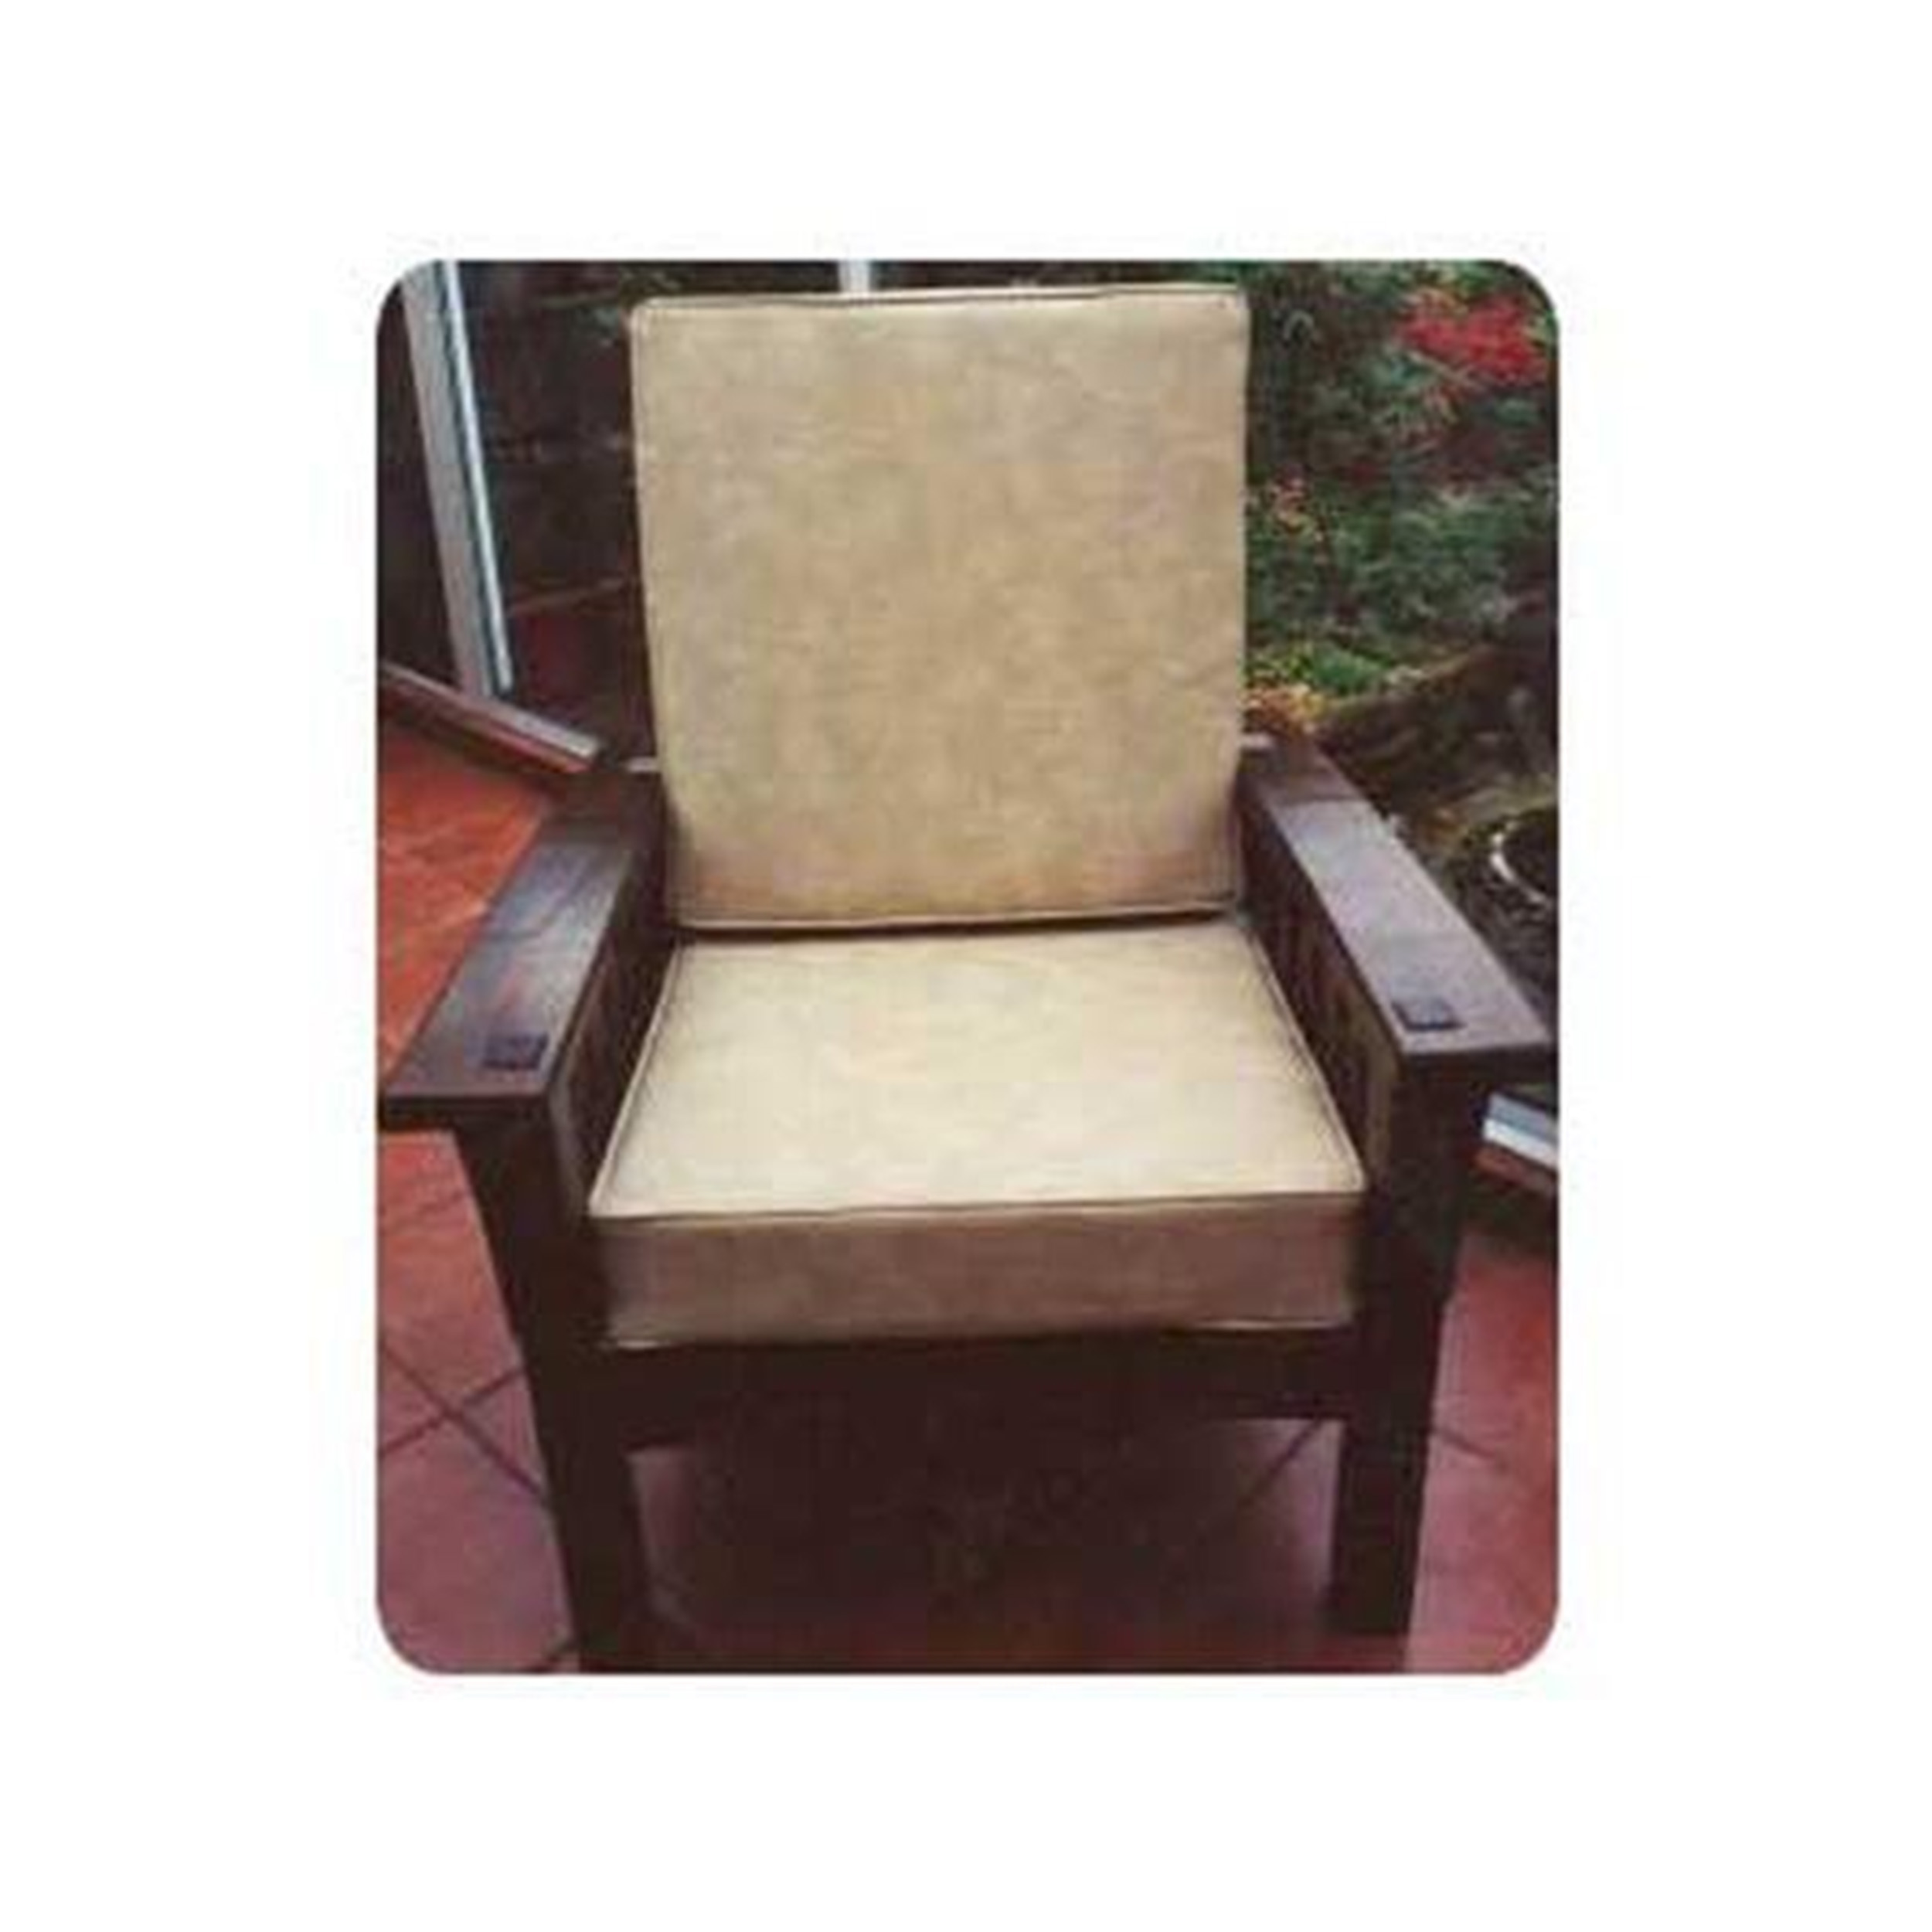 Woodworking Project Paper Plan To Build Authentic Morris Chair